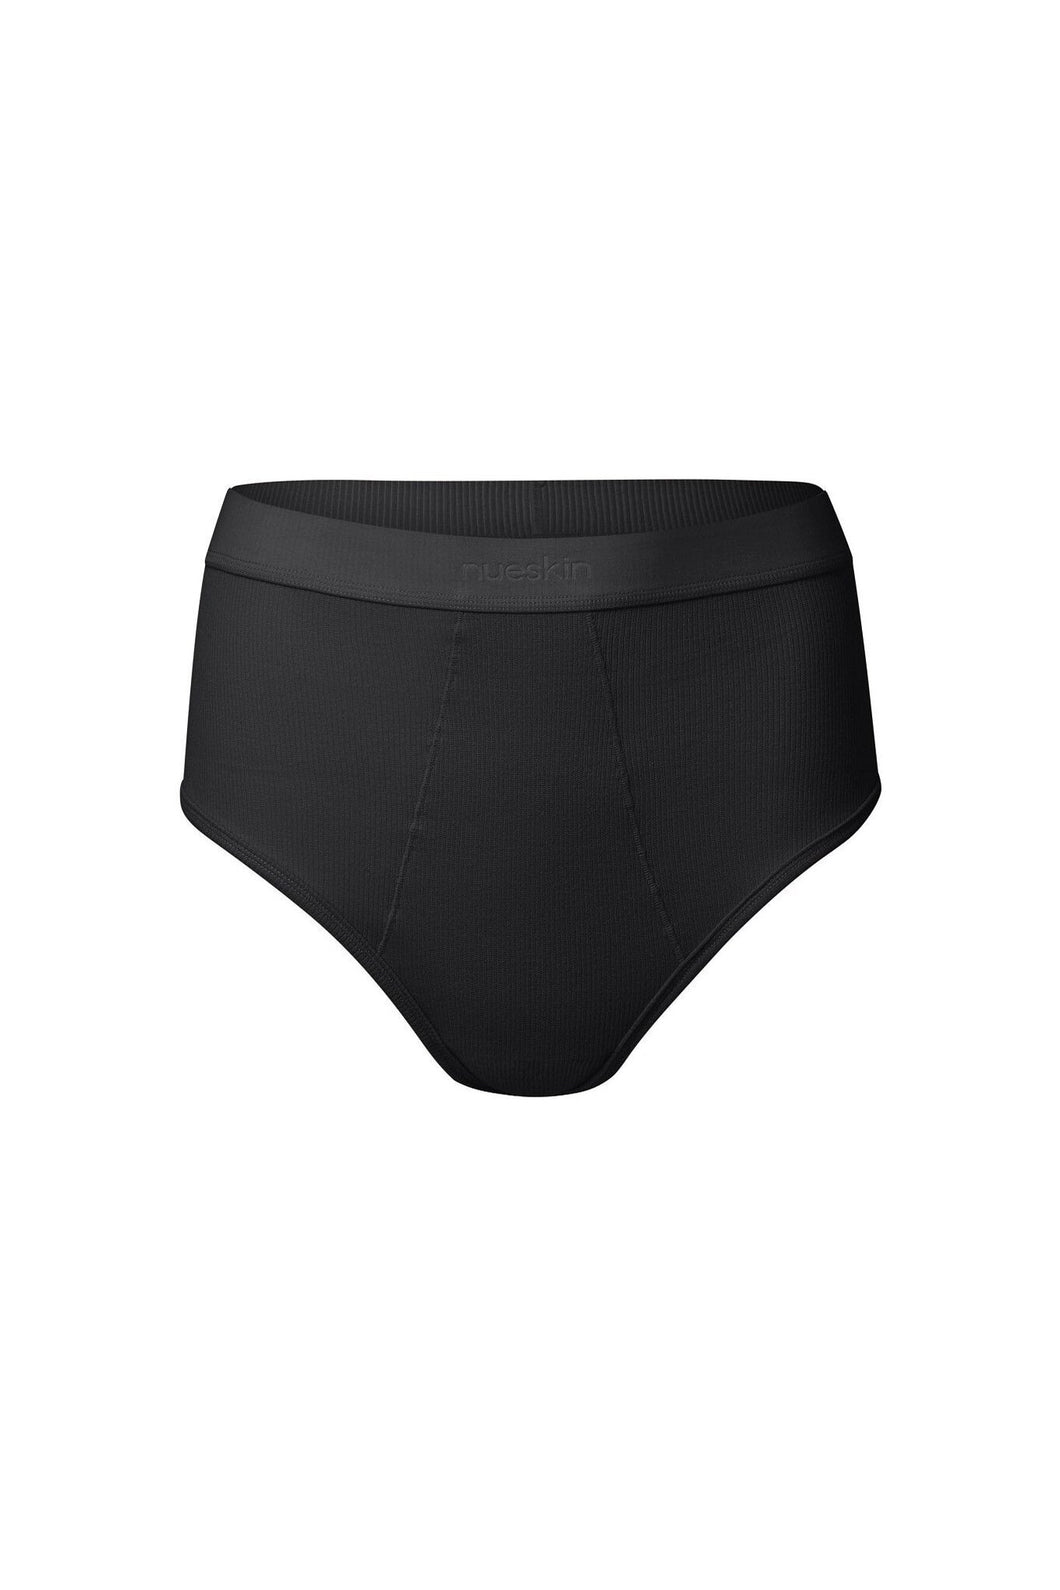 nueskin Gracee Rib Cotton High-Rise Cheeky Brief in color Jet Black and shape midi brief